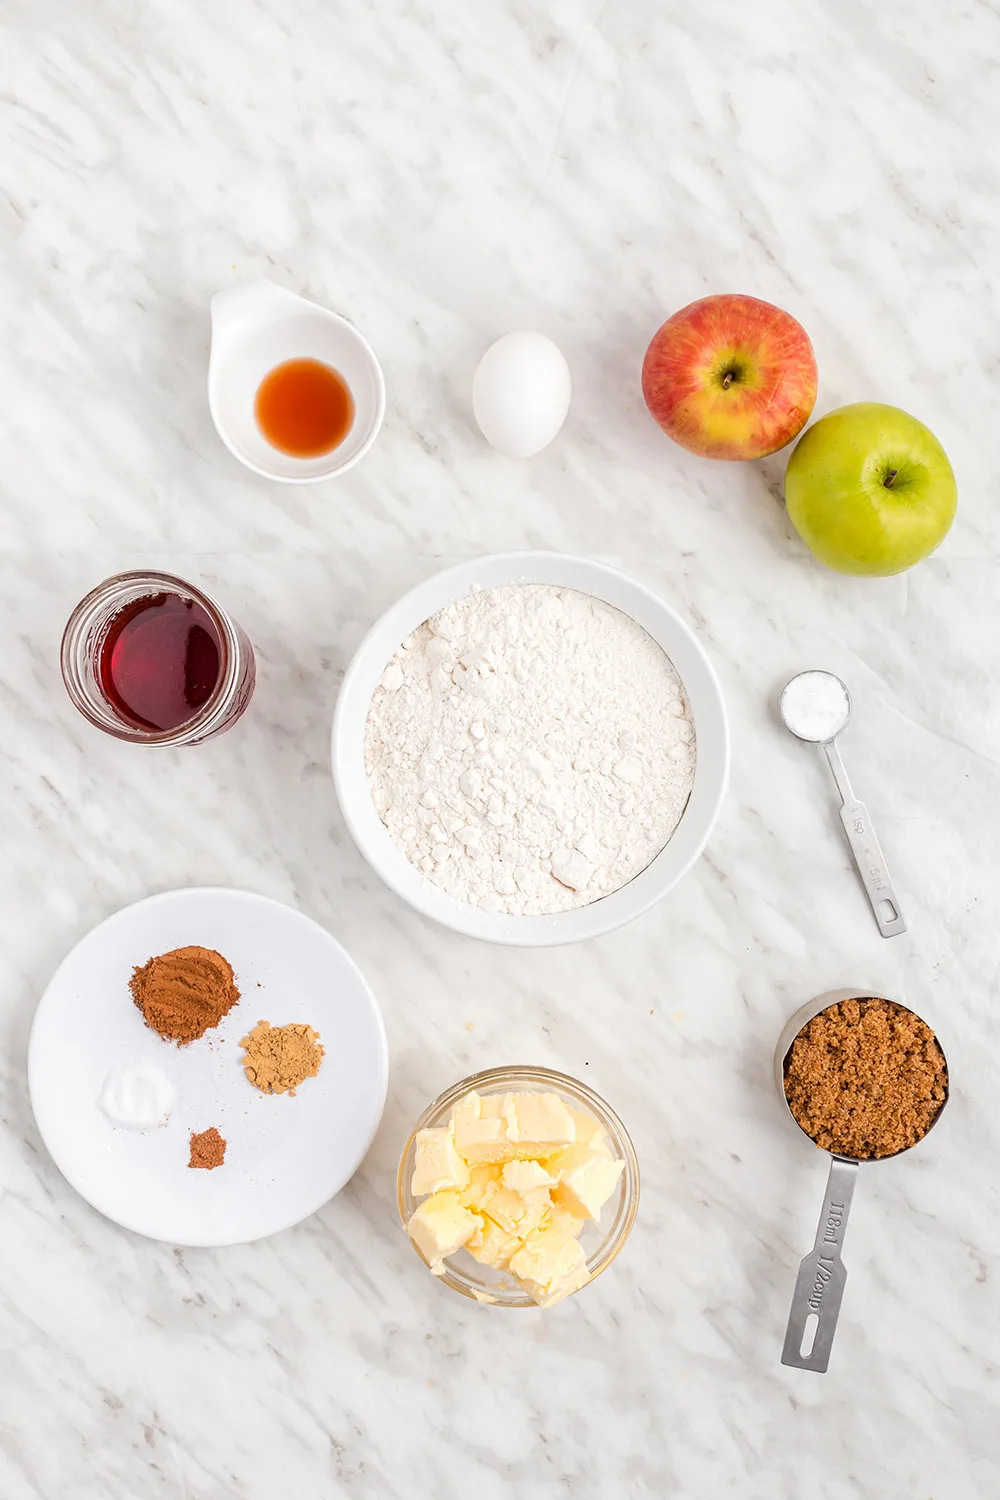 Apples, flour, cinnamon, and other ingredients on a table.